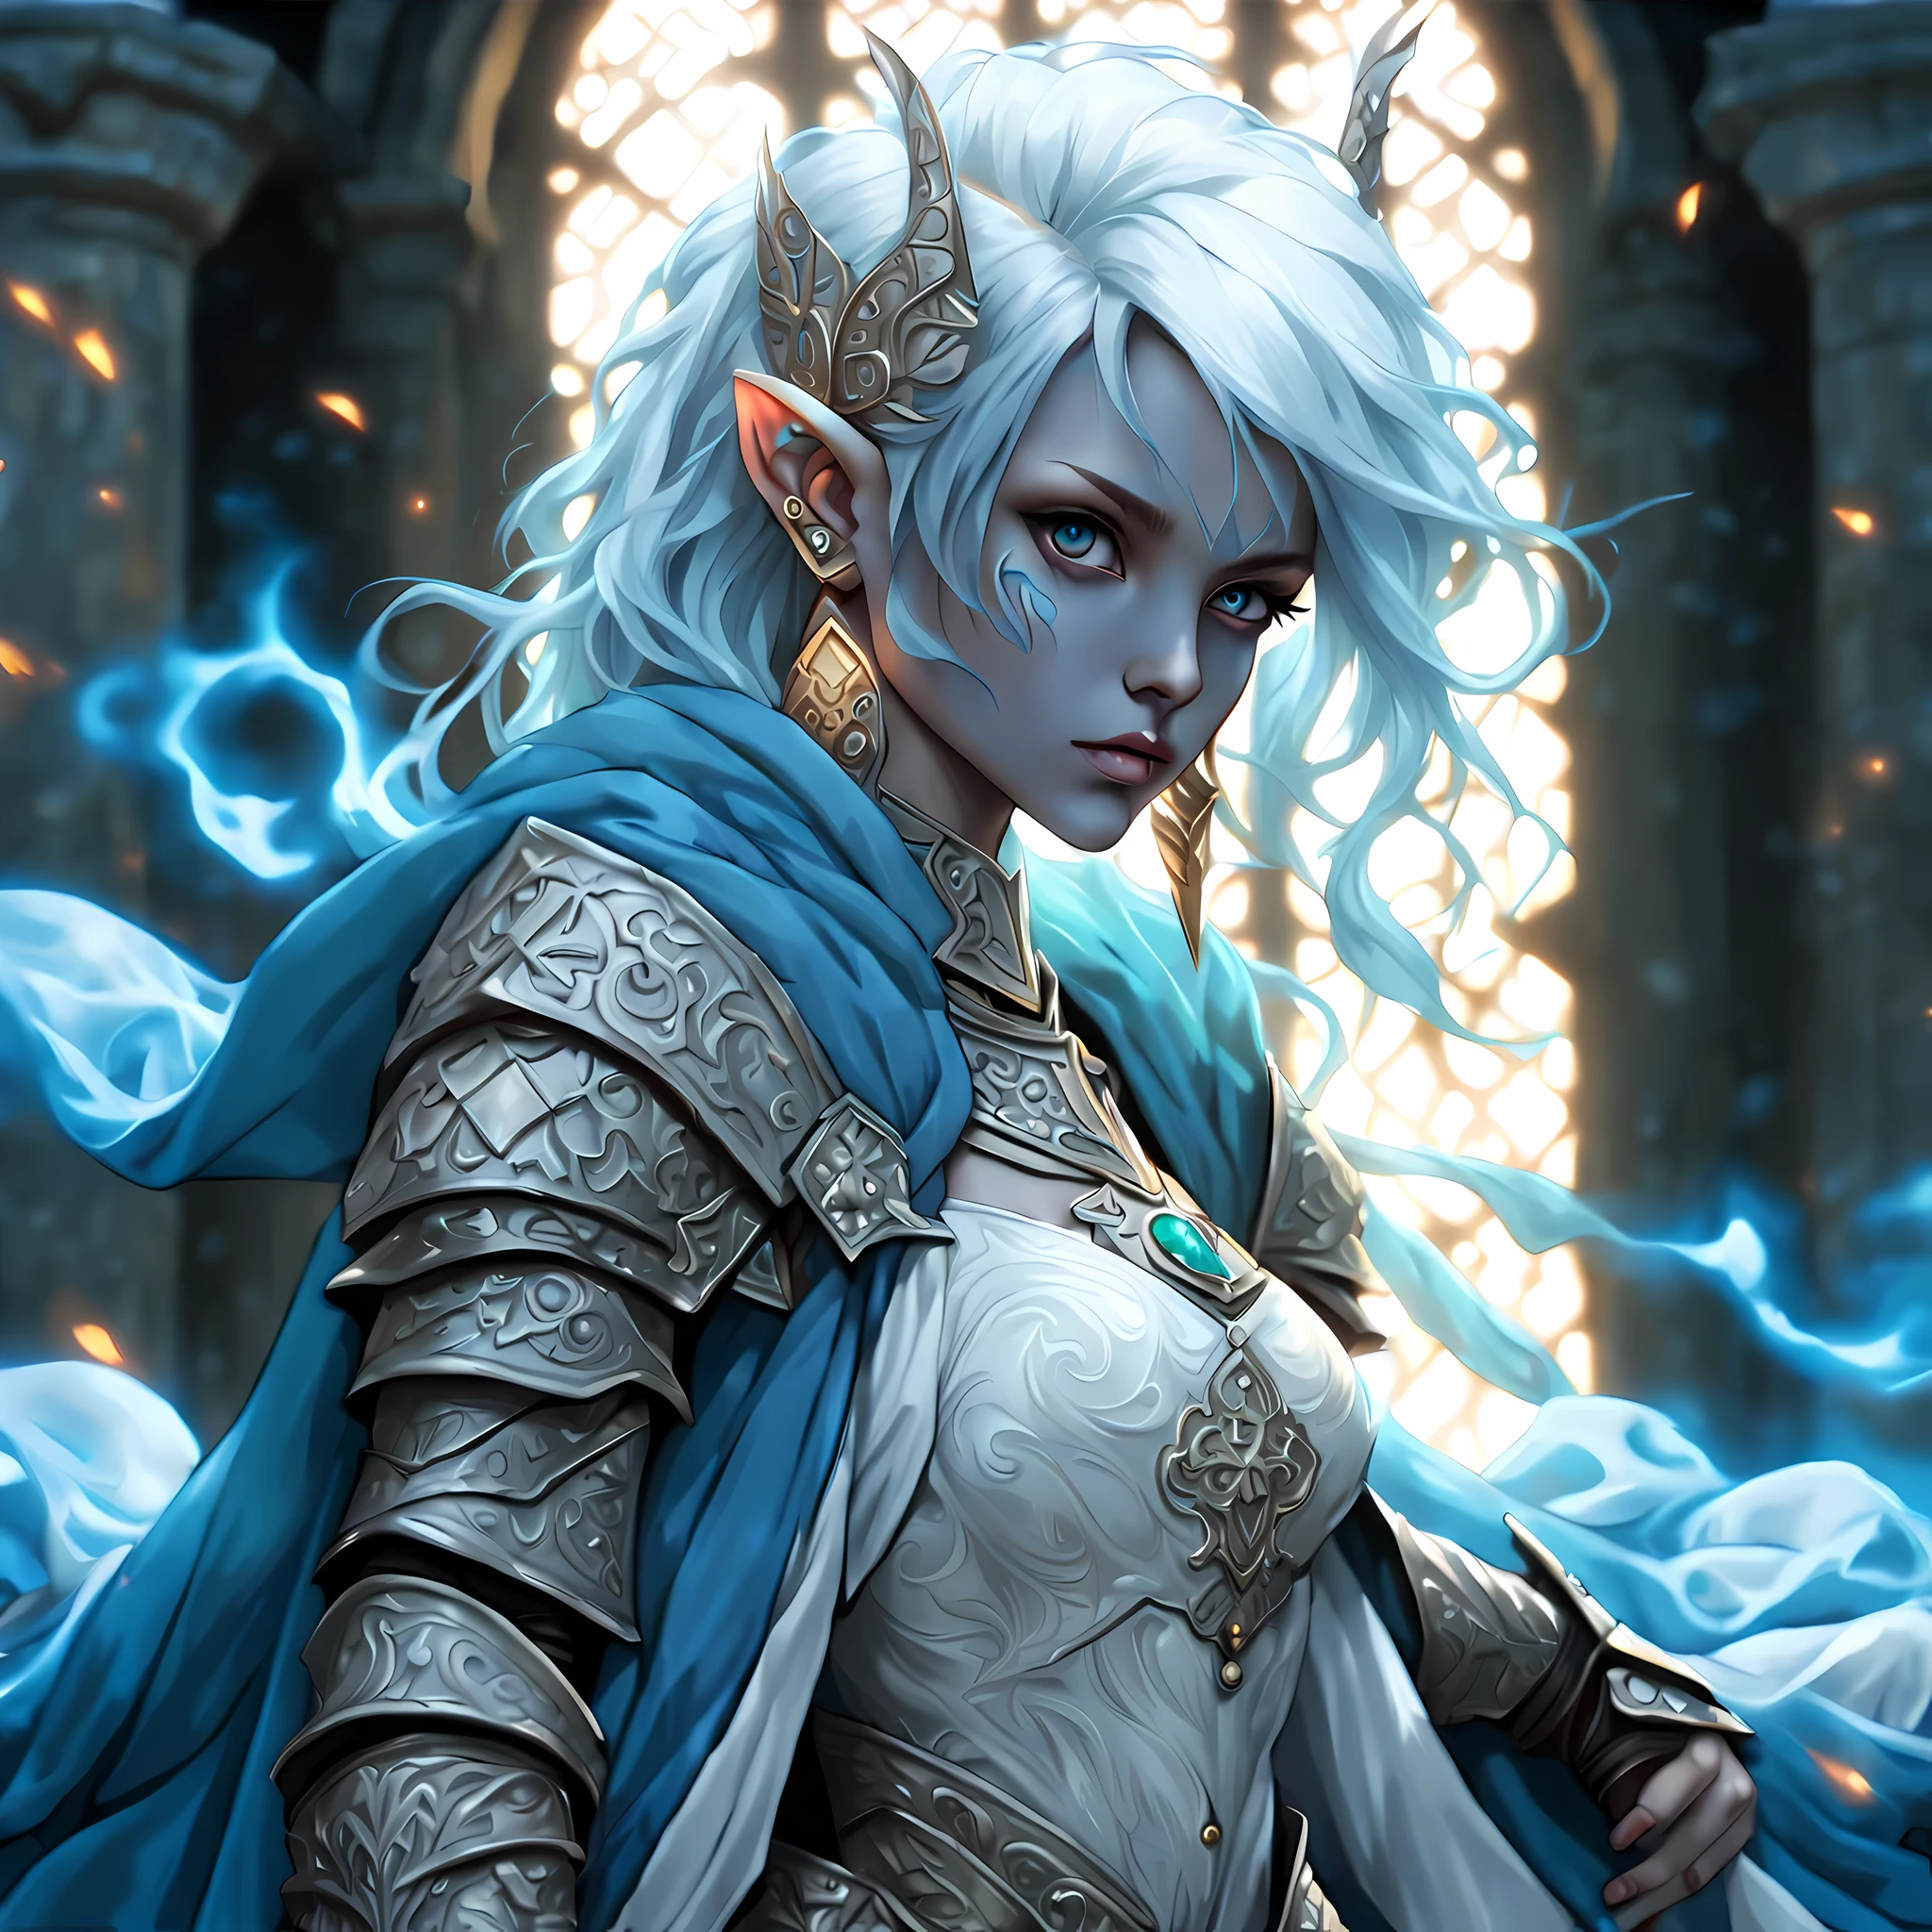 fAntAsy Art, dnd Art, RPG Art, Weitwinkelaufnahme, (mAsterpiece: 1.4) A (portrAit: 1.3) intense detAils, highly detAiled, photoreAlistic, best quAlity, highres, portrAit A femAle (fAntAsy Art, MAsterpiece, best quAlity: 1.3) ((Blau skin: 1.5)), intense detAils fAciAl detAils, exquisite beAuty, (fAntAsy Art, MAsterpiece, best quAlity) Kleriker, (Blau: 1.3) skinned femAle, (Weiß hAir: 1.3), bAld heAd (Grün: 1.3) Auge, fAntAsy Art, MAsterpiece, best quAlity) Armed A fiery sword red fire, weAring heAvy (Weiß: 1.3) hAlf plAte mAil Armor, weAring high heeled lAced boots, weAring An(orAnge :1.3) cloAk, weAring glowing holy symbol GlowingRunes_Gelb, within fAntAsy temple bAckground, Action shot reflection light, high detAils, best quAlity, 16k, [ultrA detAiled], mAsterpiece, best quAlity, (extremely detAiled), Nahaufnahme, ultrA Weitwinkelaufnahme, photoreAlistic, Roh, fAntAsy Art, dnd Art, fAntAsy Art, reAlistic Art,((best quAlity)), ((mAsterpiece)), (detAiled), perfect fAce, ((no eArs: 1.6))